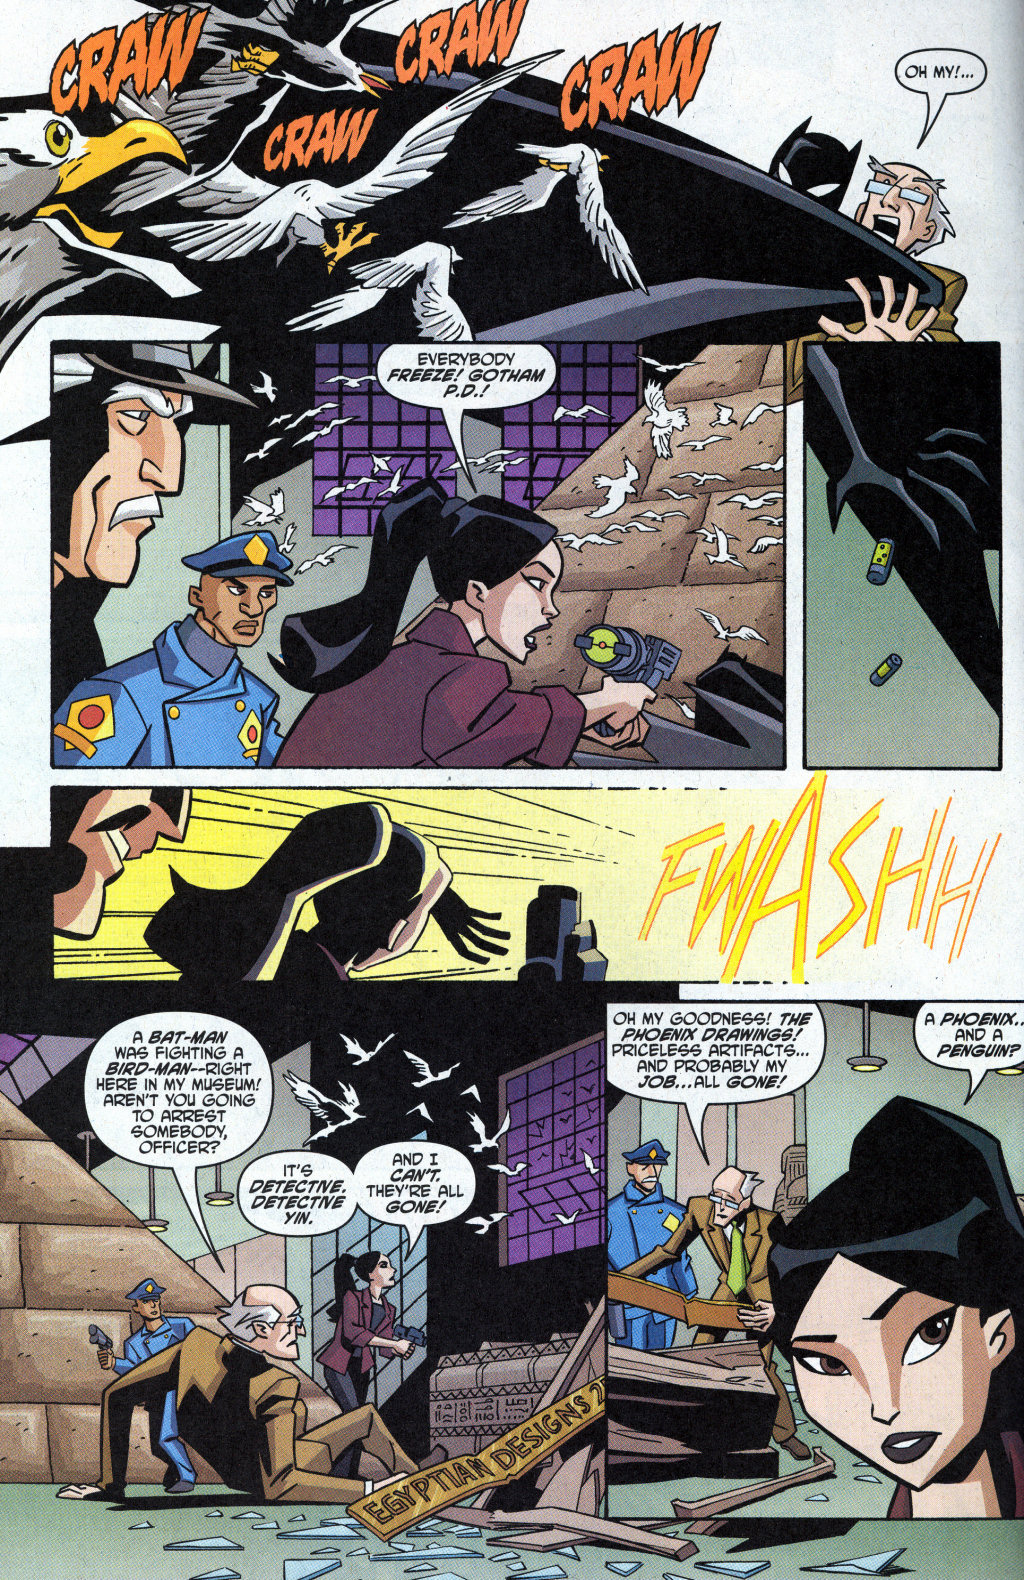 The Batman Strikes! issue 1 (Burger King Giveaway Edition) - Page 12